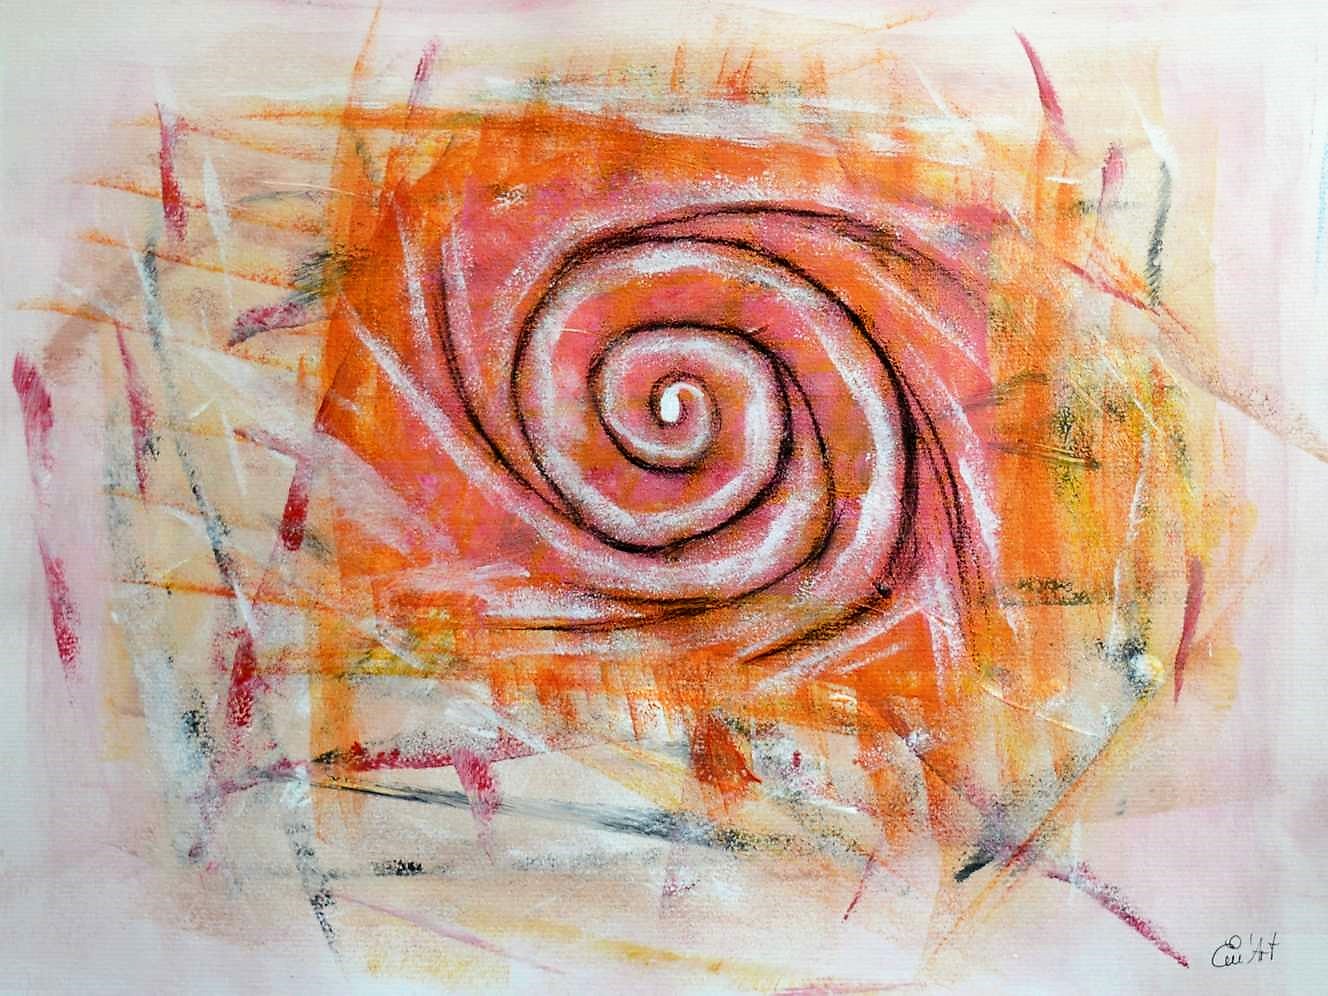 Interstellar, acrylic & charcoal on paper by Emmanuelle Baudry